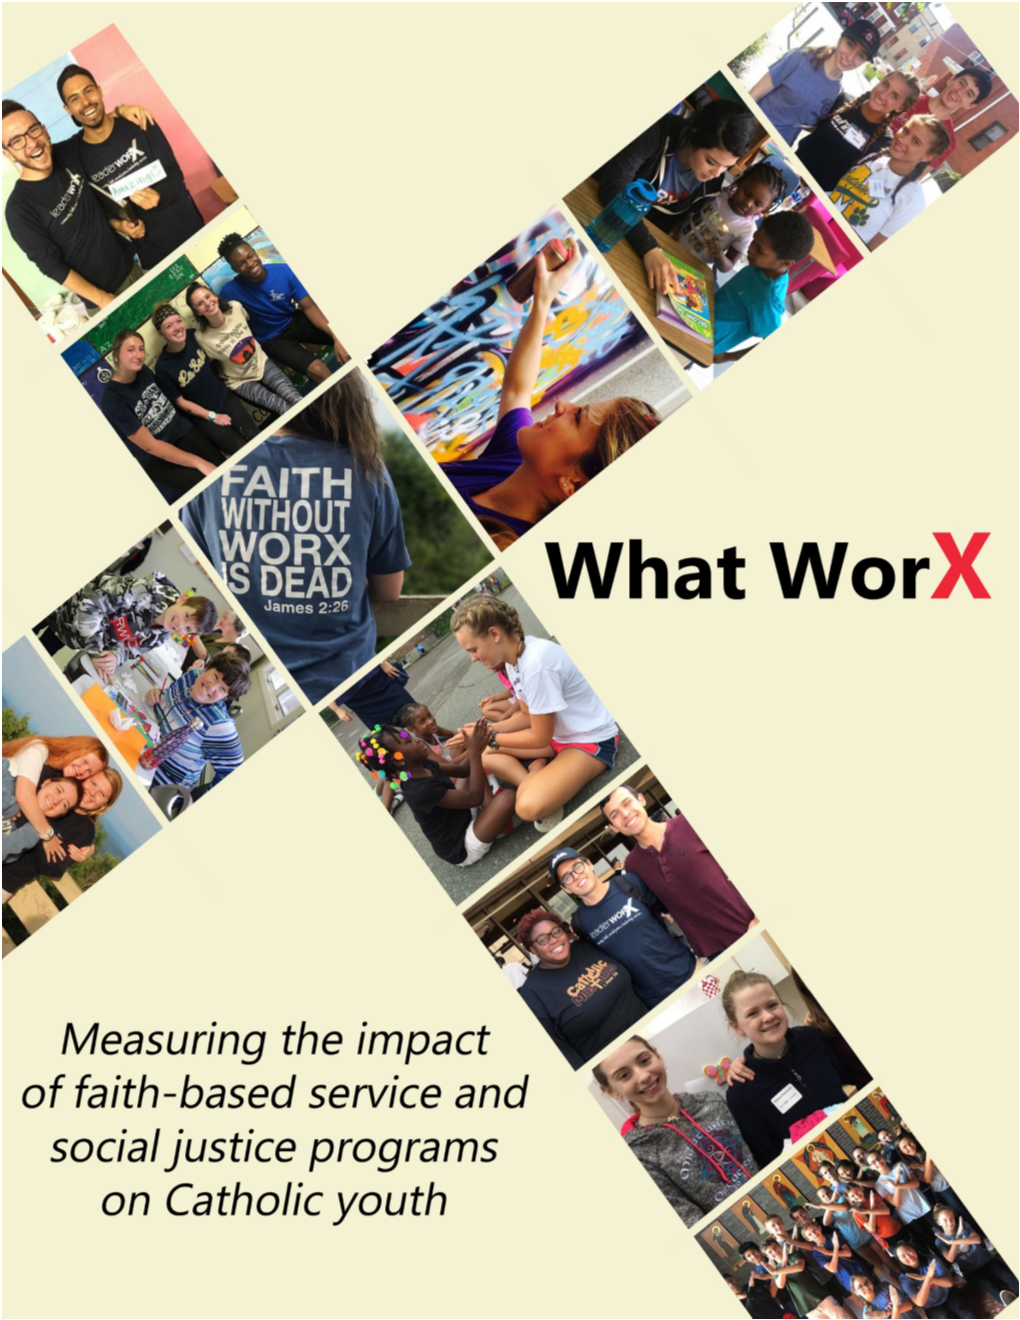 What Worx: Measuring the Impact of Faith-Based Service and Social